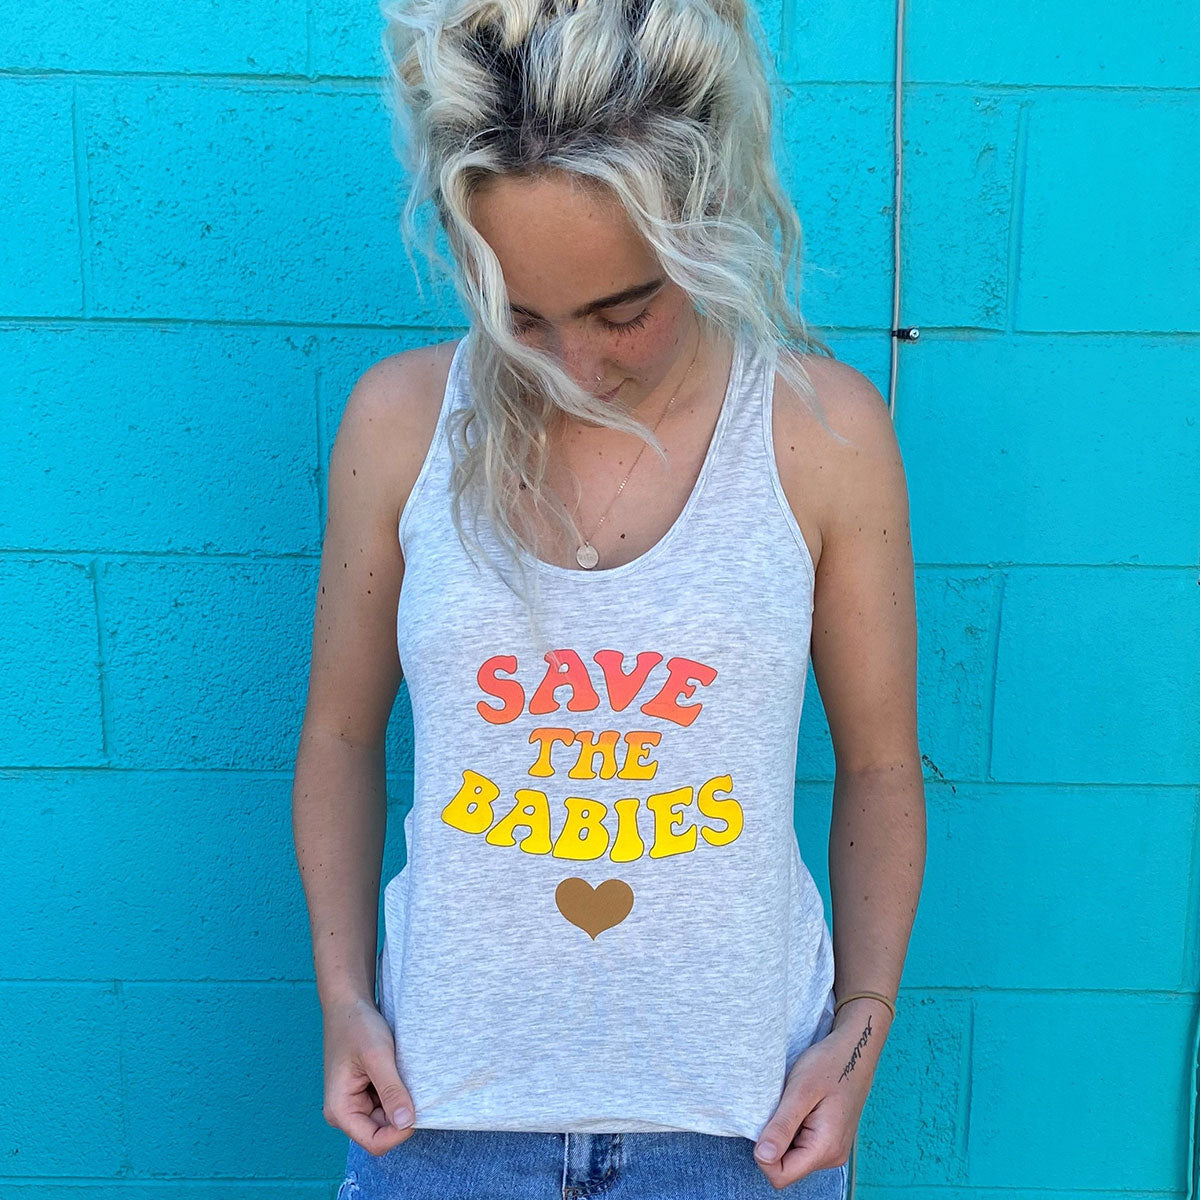 New Save The Babies Tank!